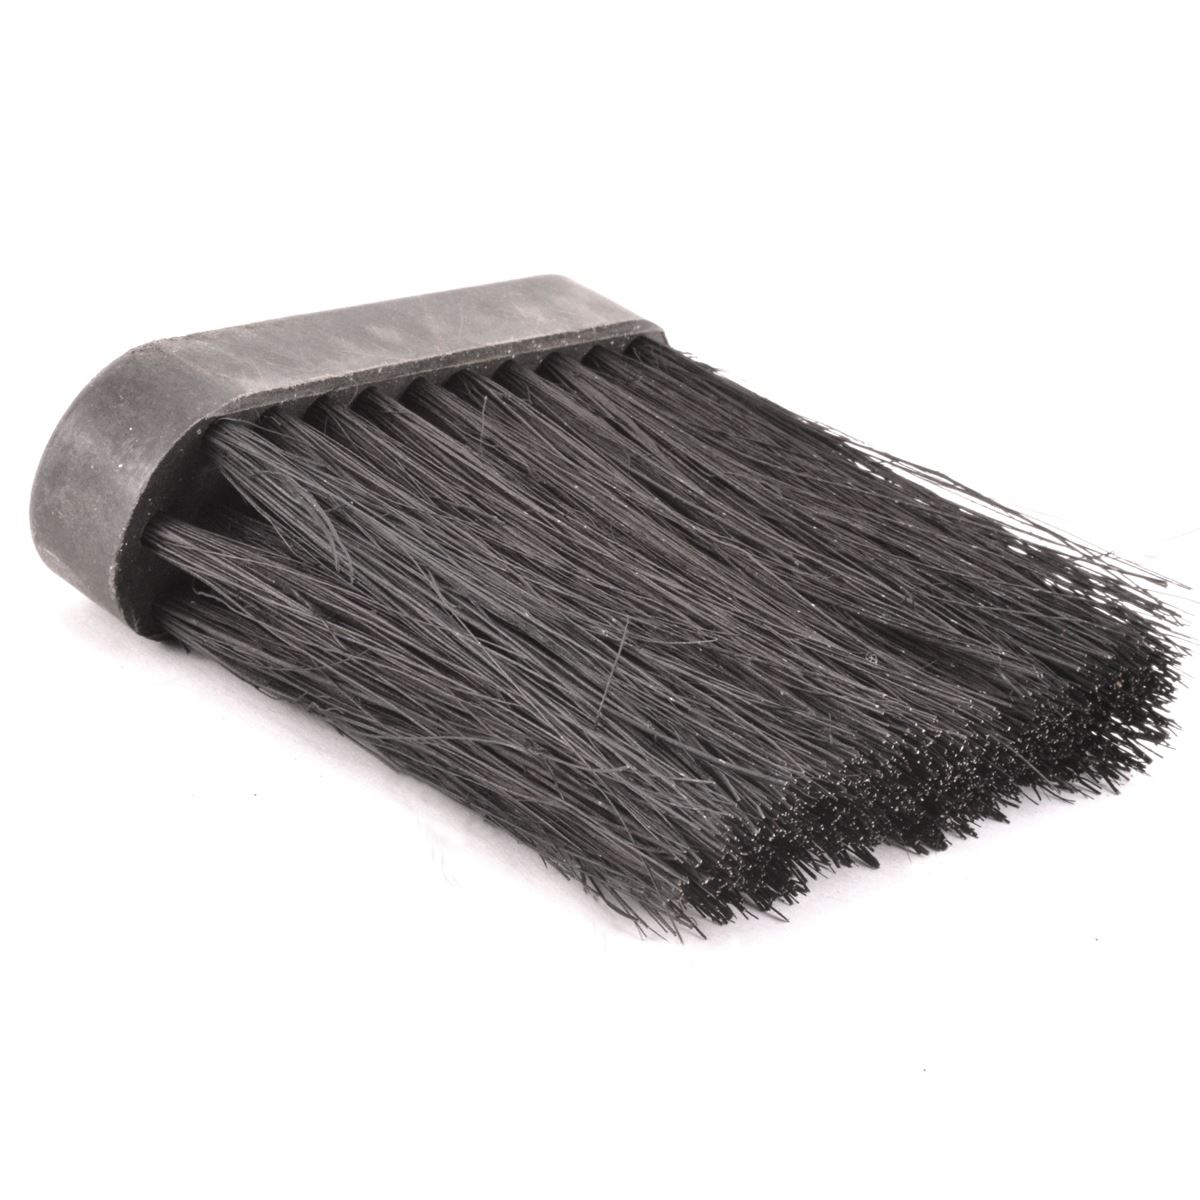 What is the length, width and height of the Manor replacement oblong hearth brush head?